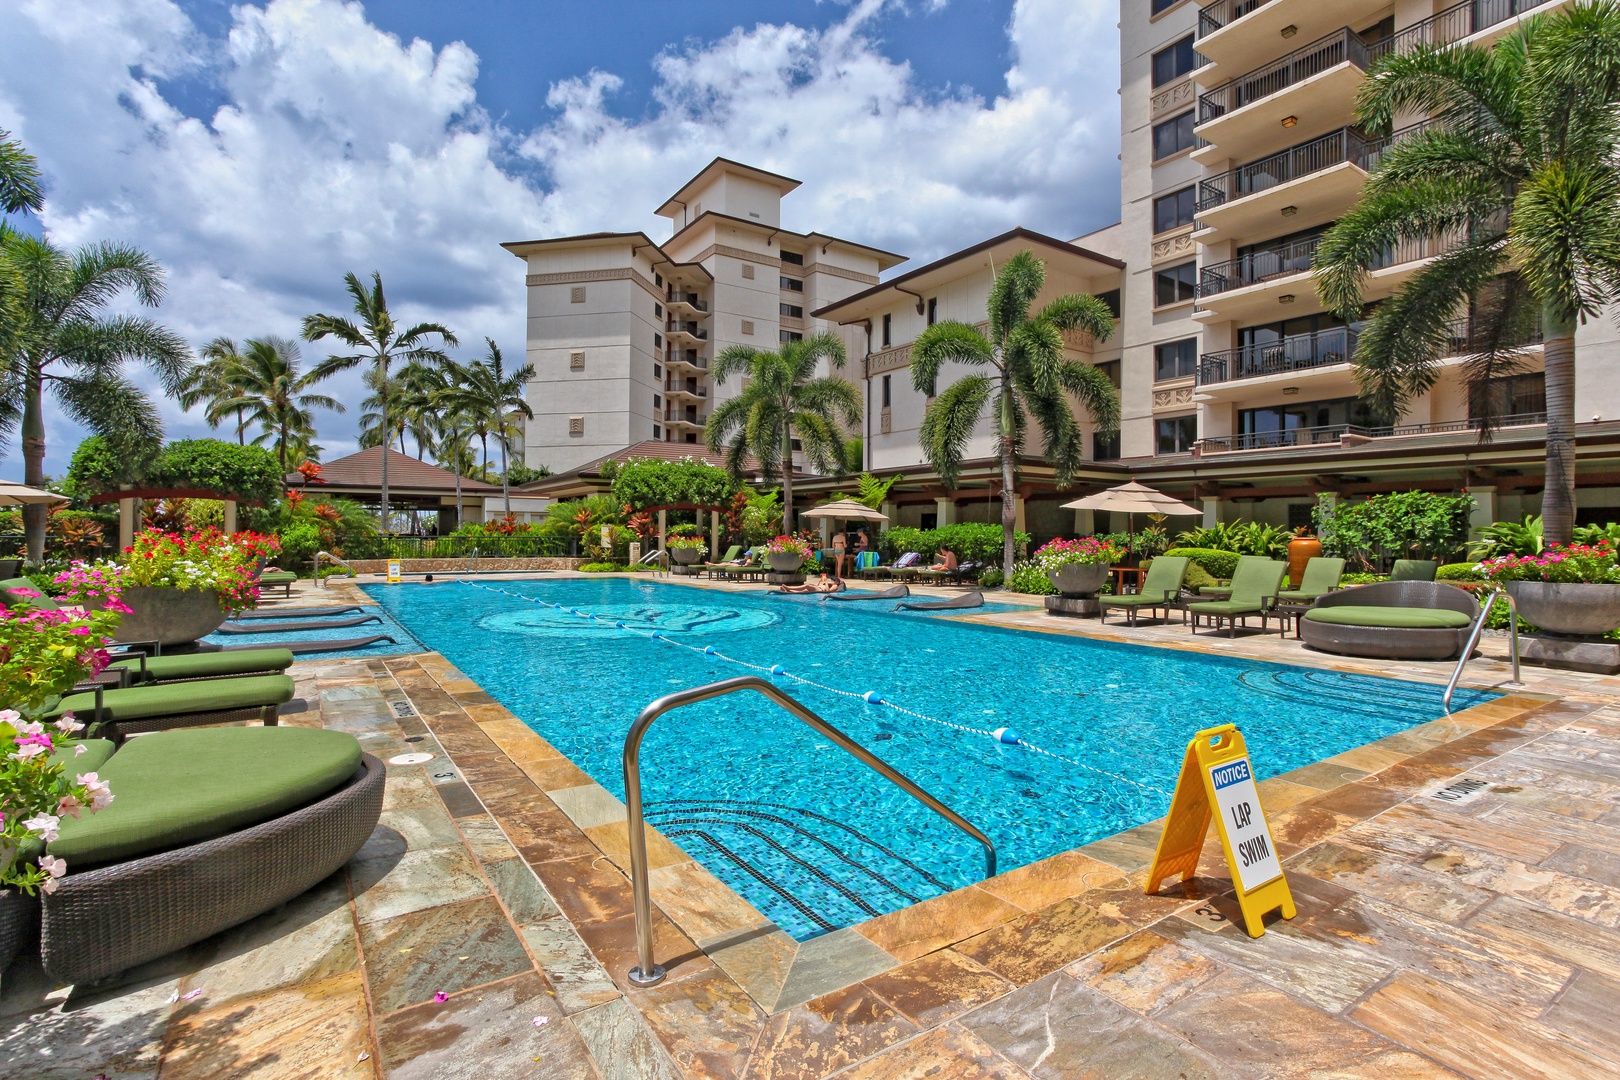 Kapolei Vacation Rentals, Ko Olina Beach Villas O210 - You will have lap pool access from to relax and renew.